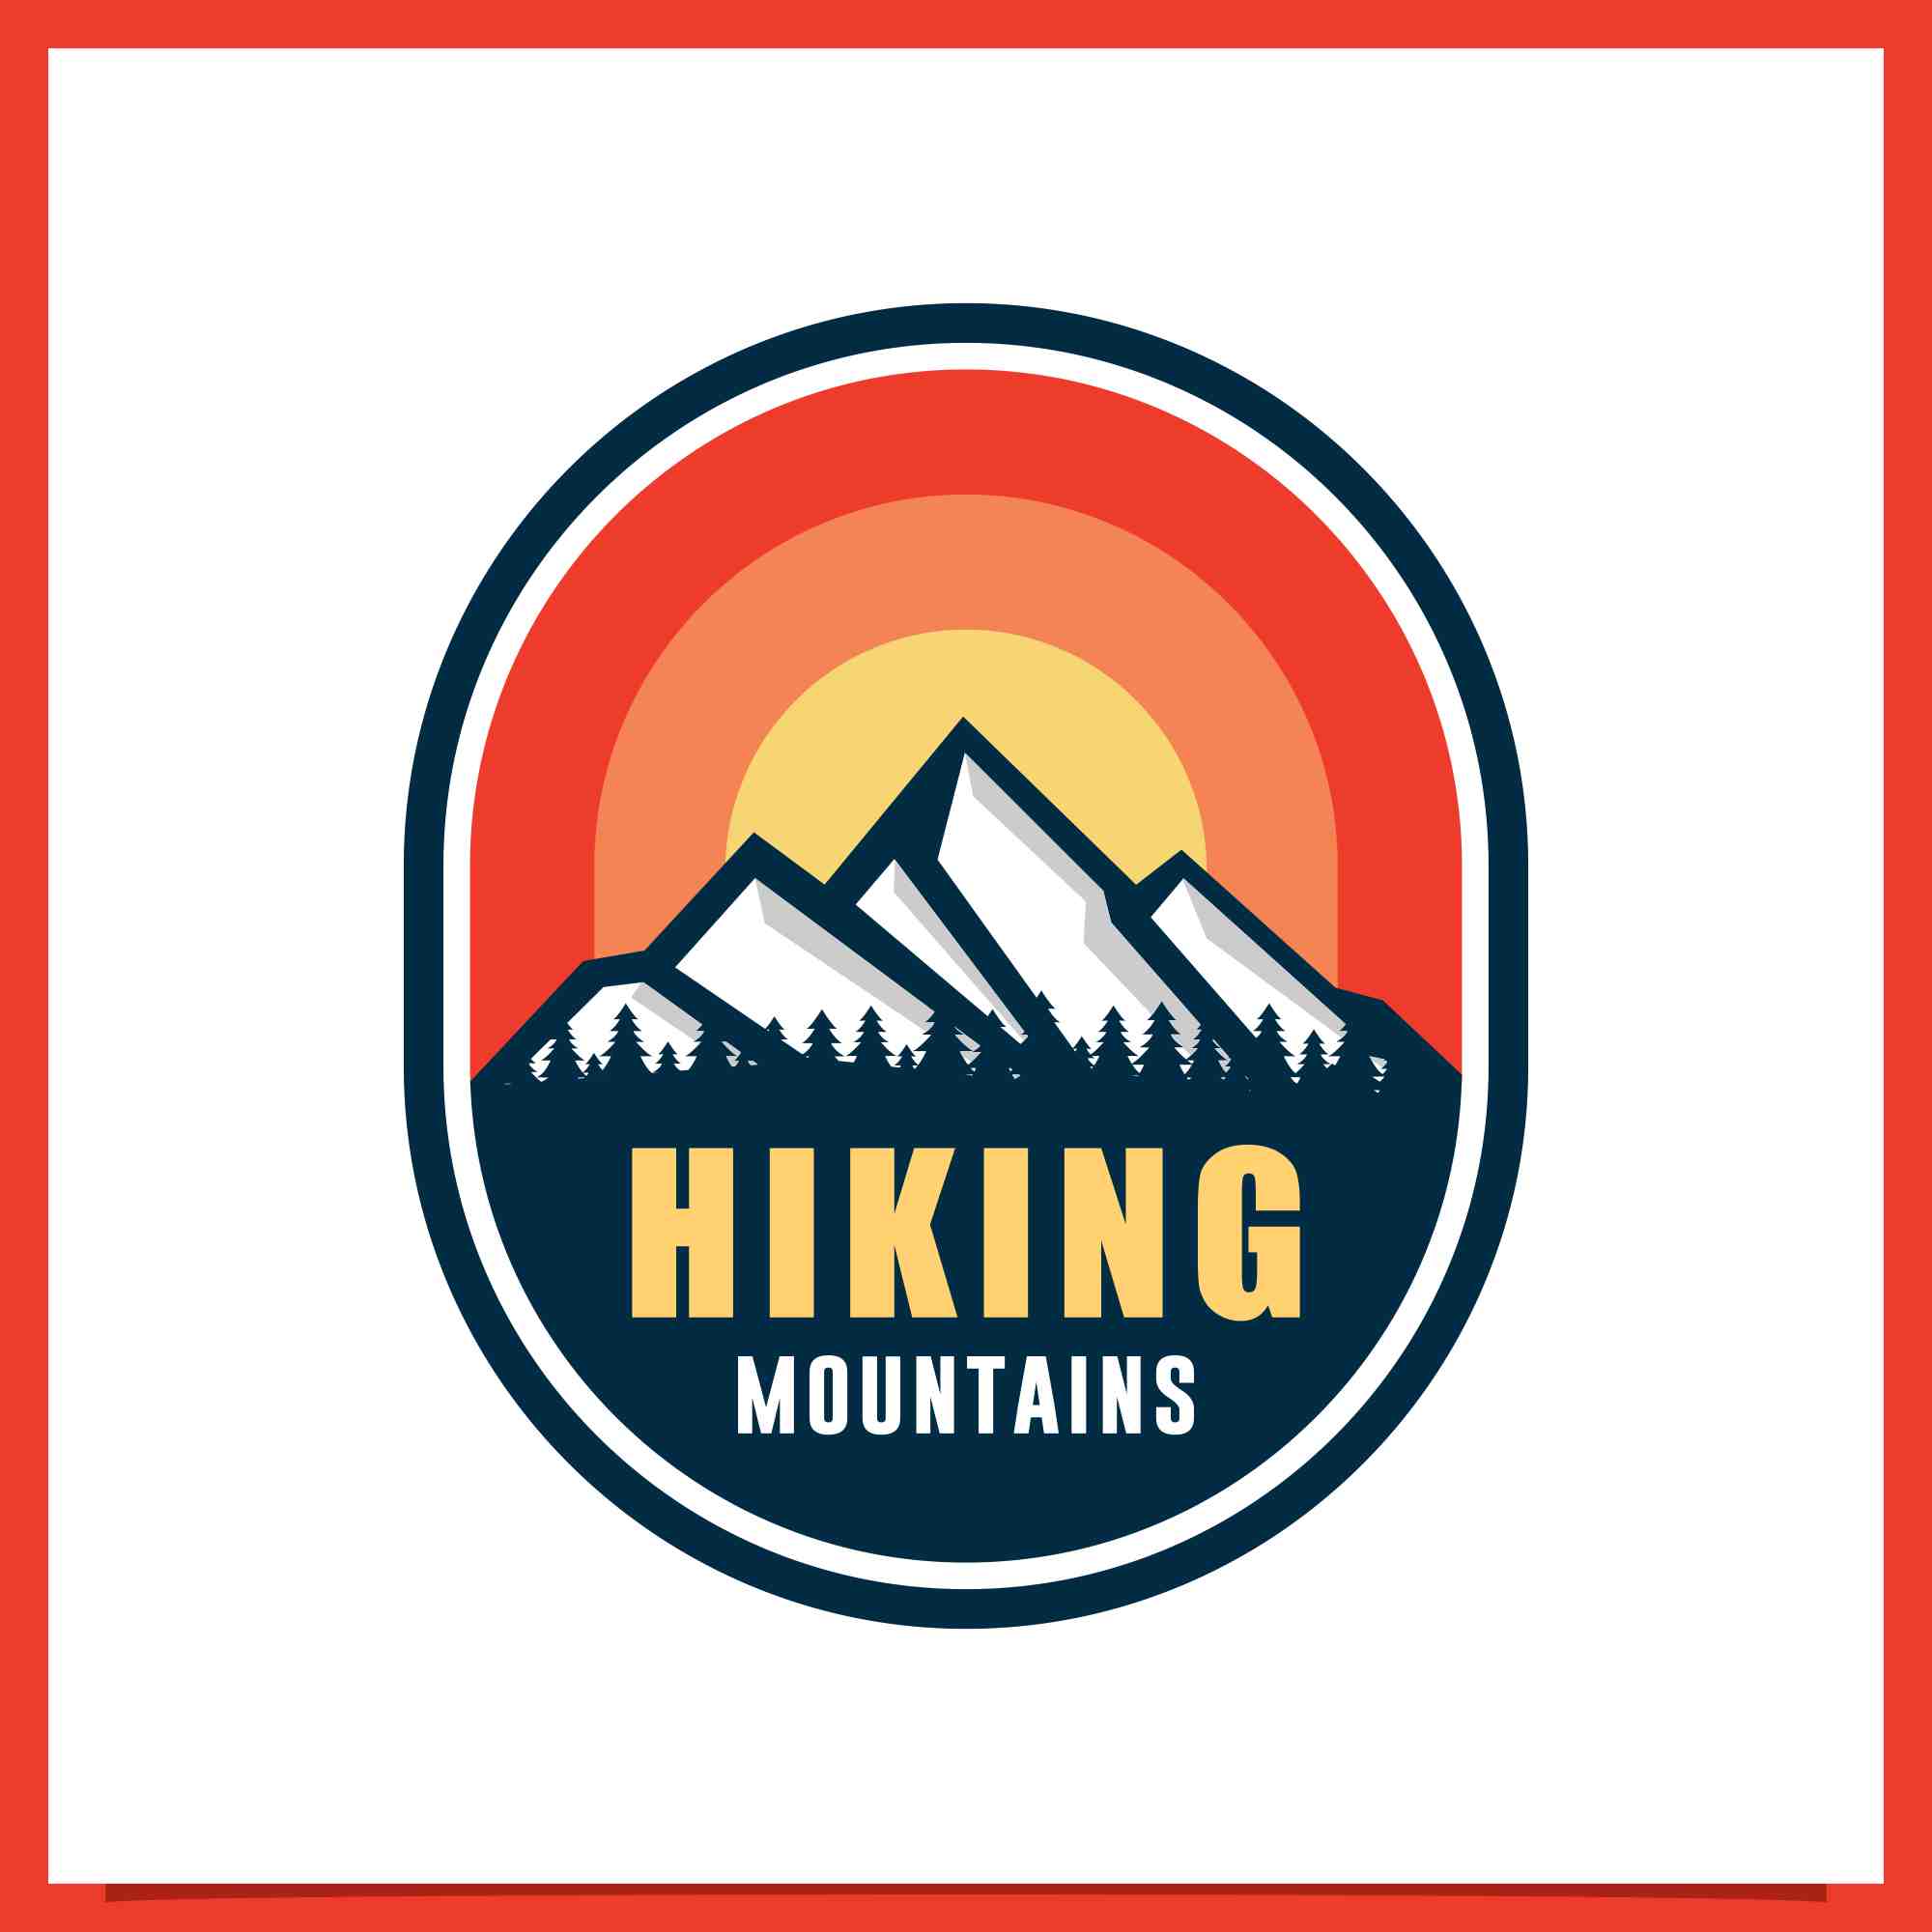 Set Hiking Adventure Wild Life logo collection - $4 preview image.